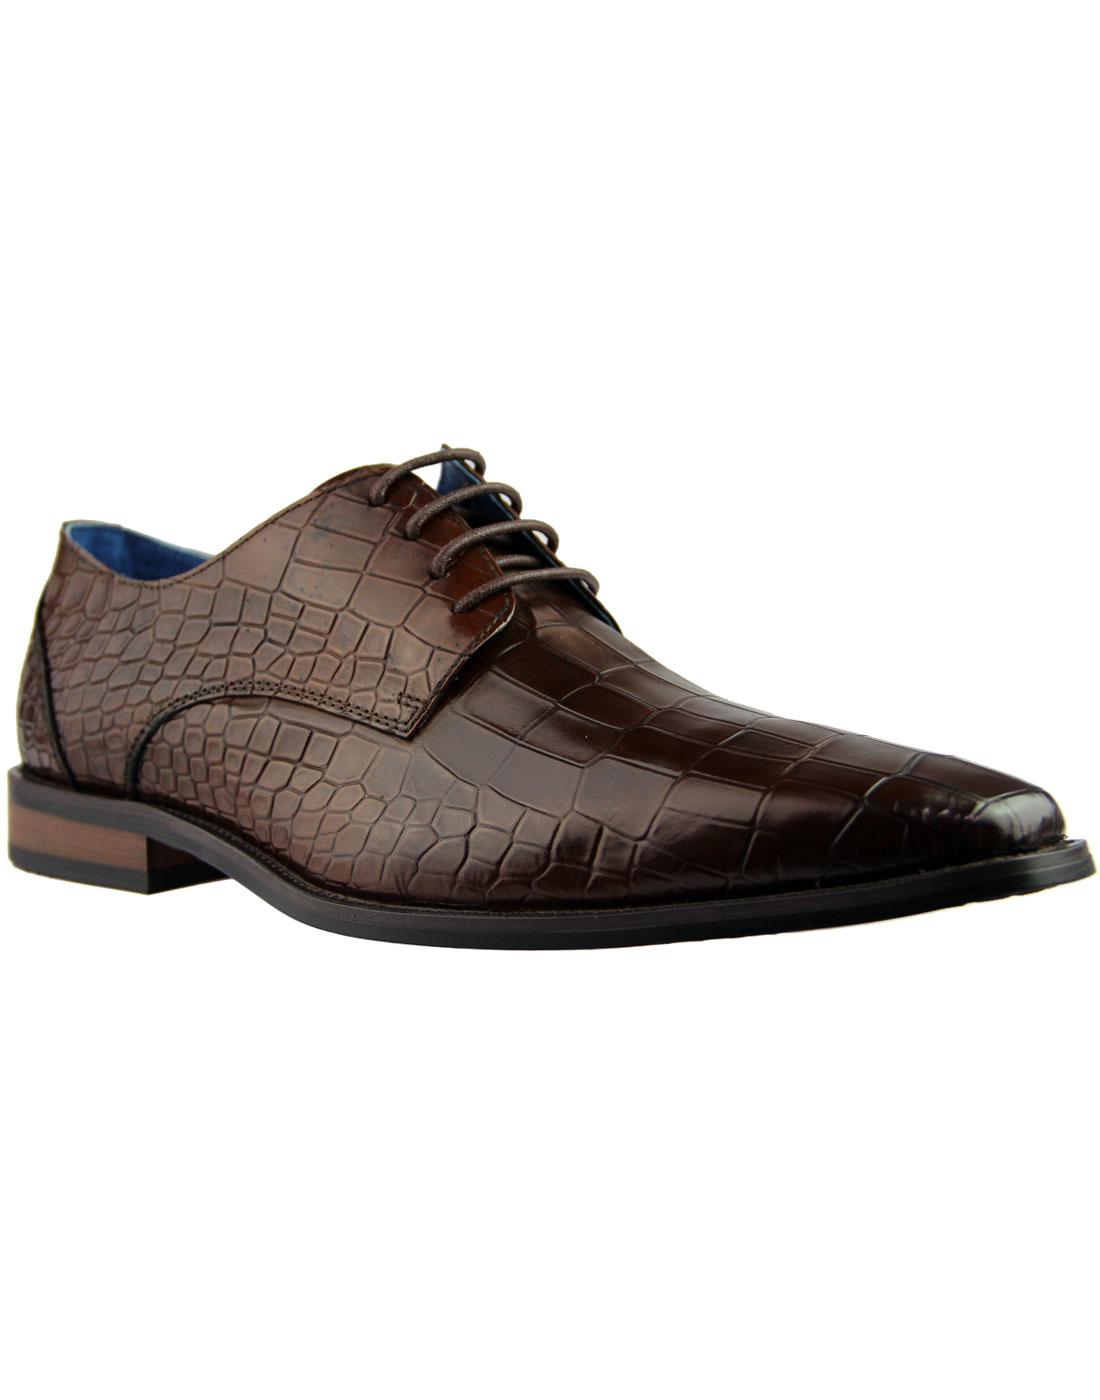 Teilo PAOLO VANDINI Croc Stamp Chisel Shoes BROWN